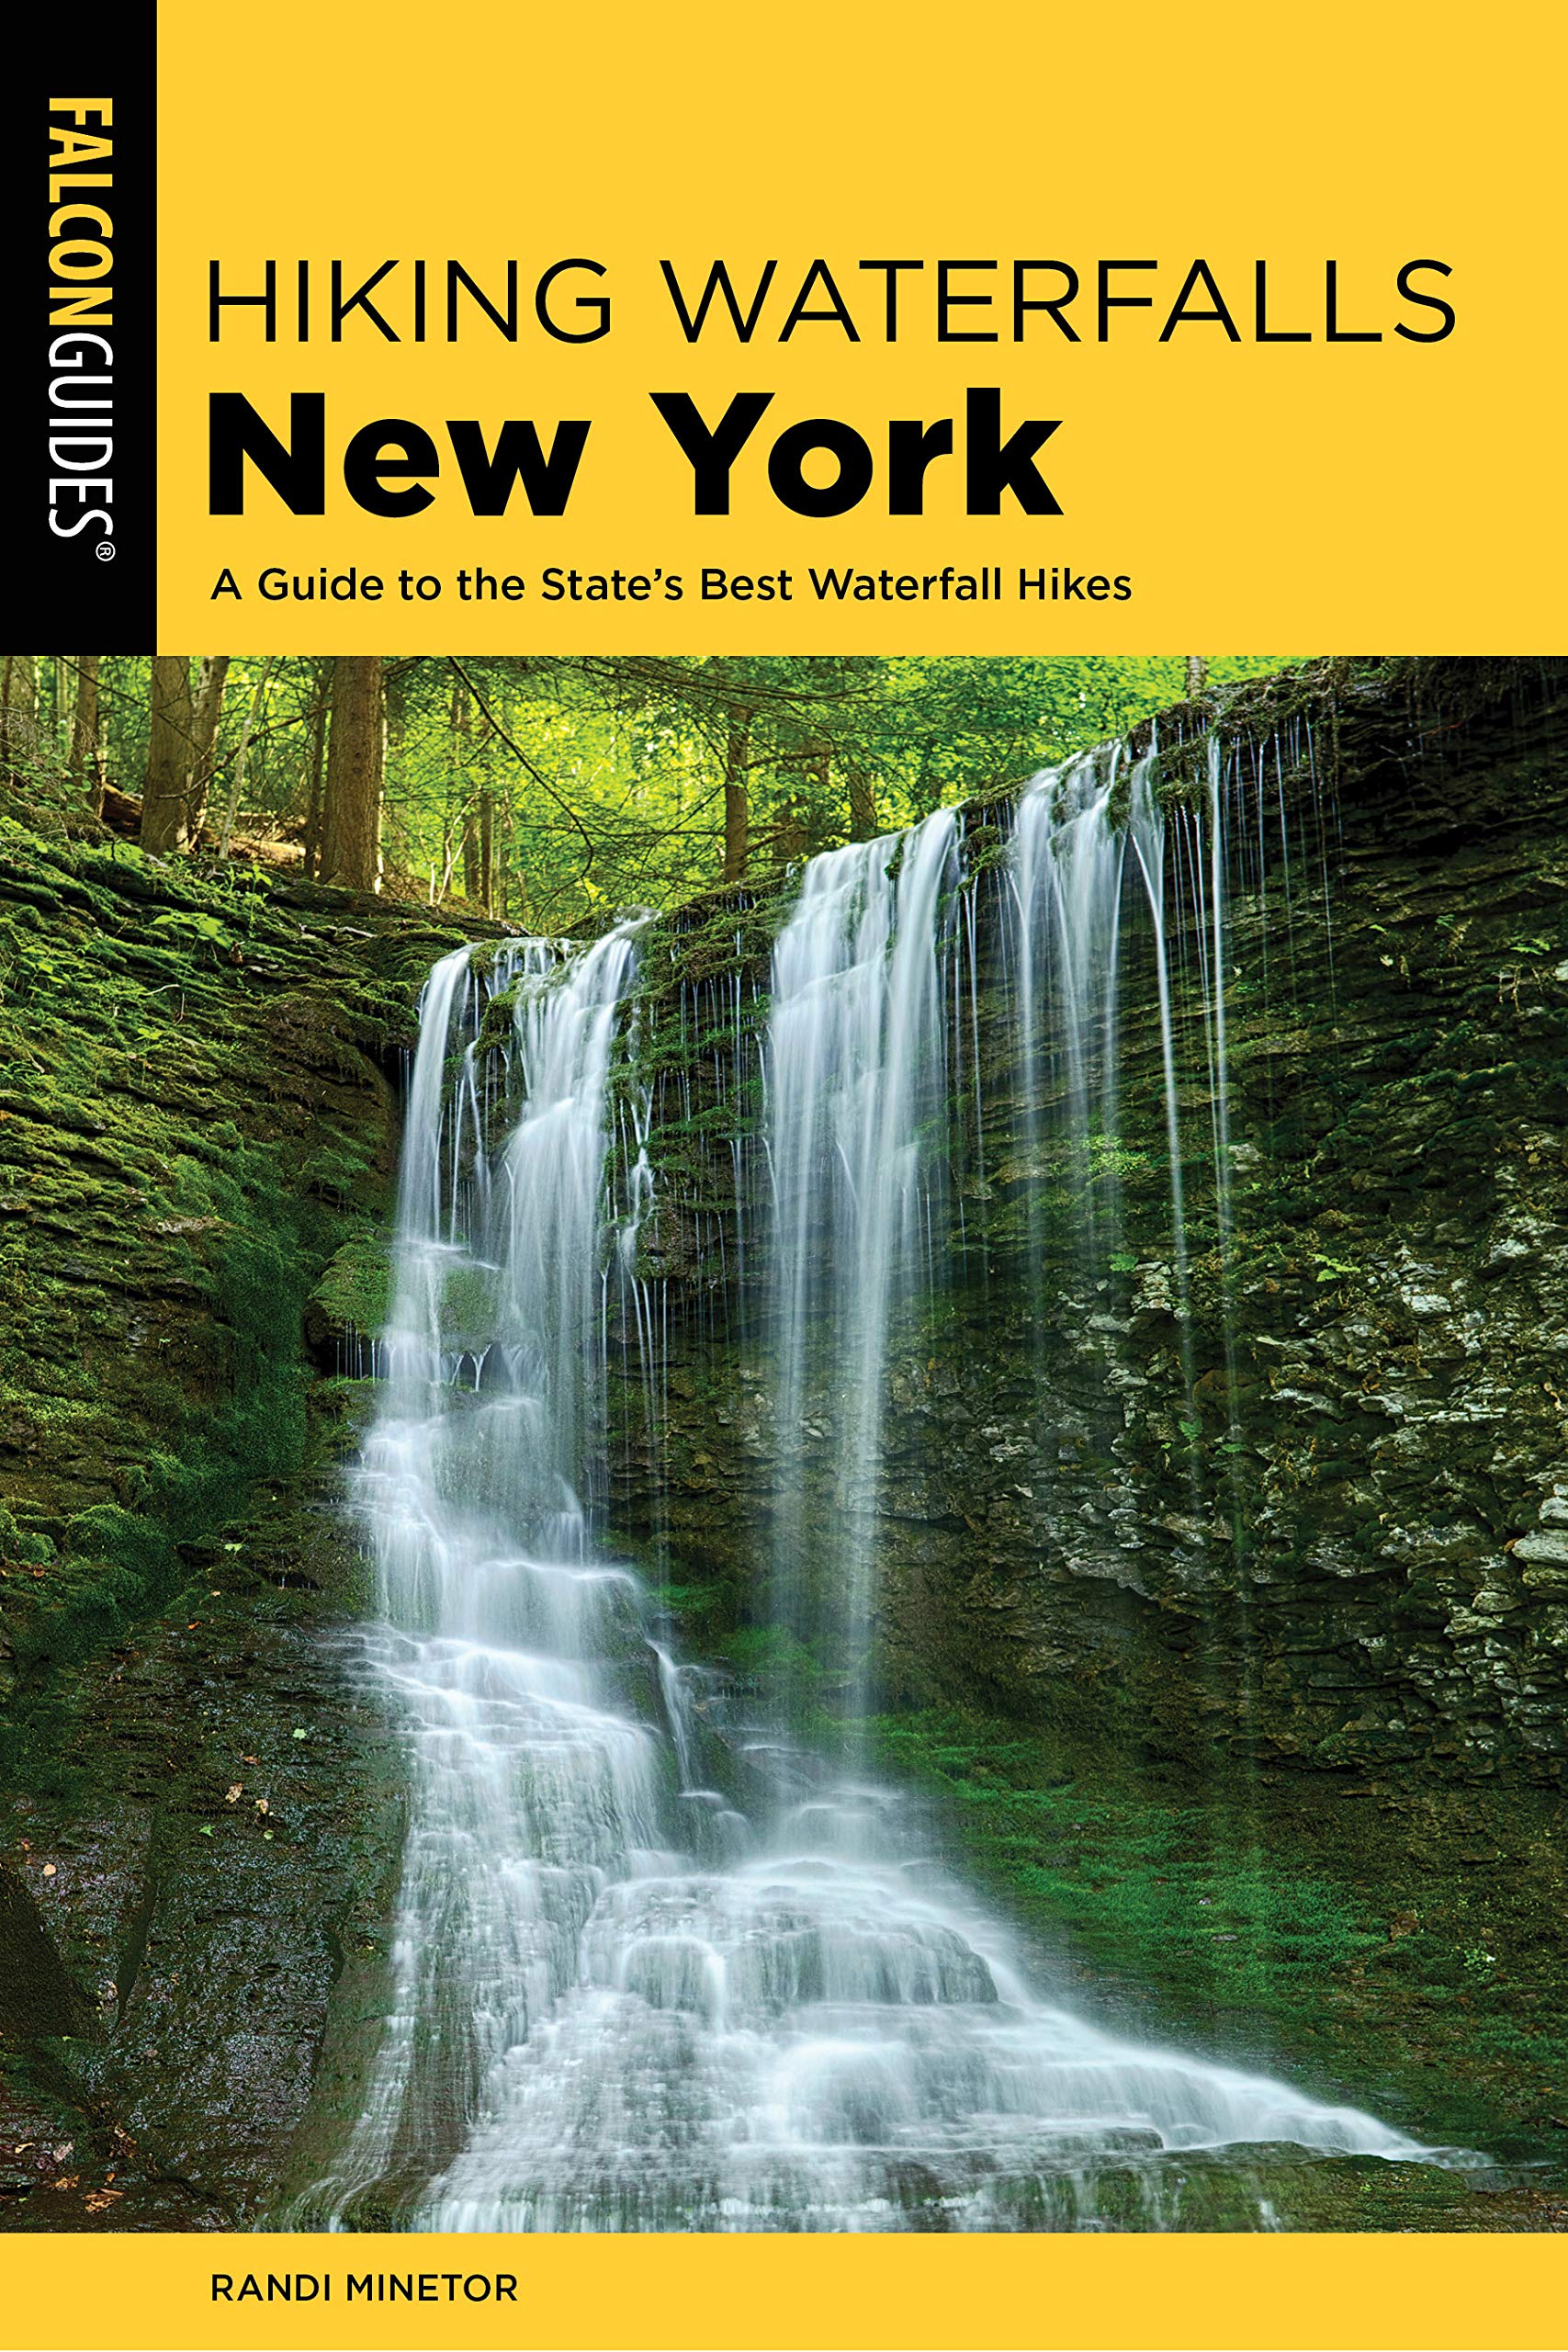 Hiking Waterfalls New York: A Guide To The State's Best Waterfall Hikes